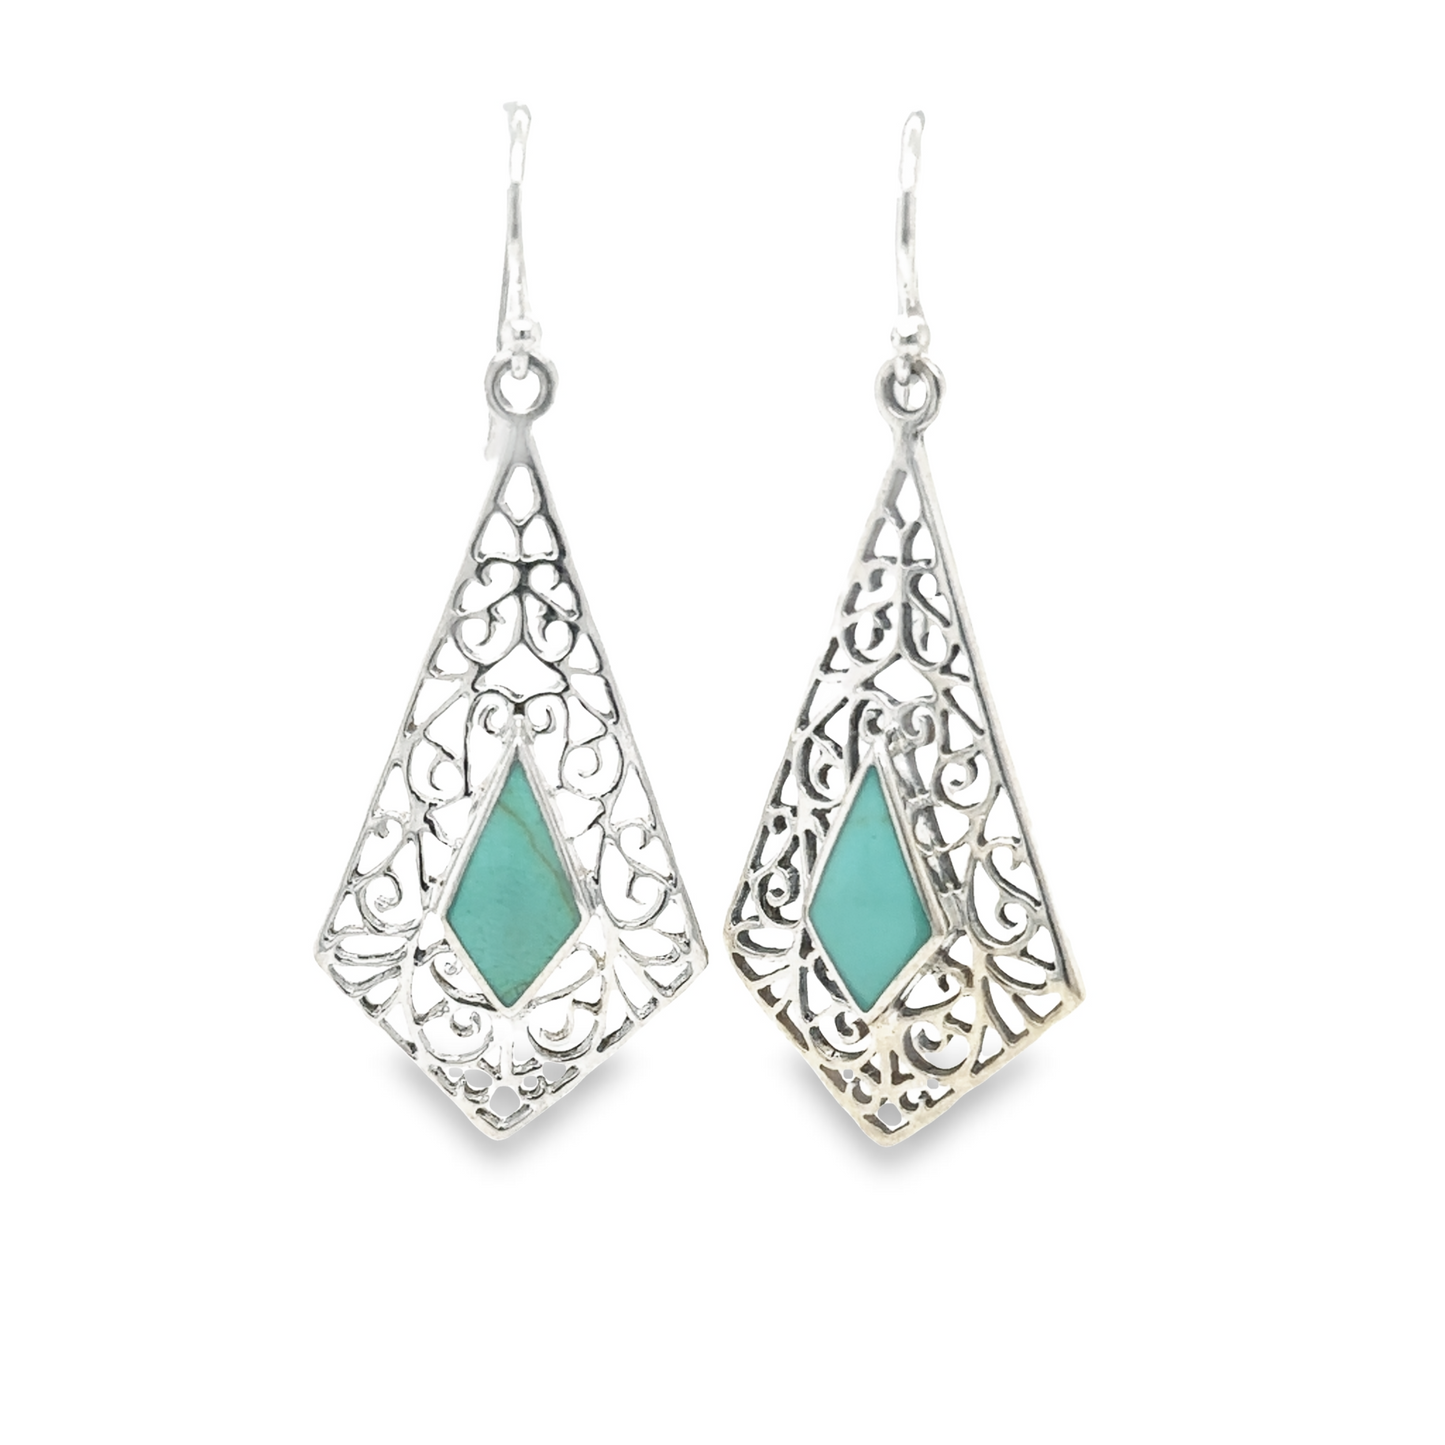 
                  
                    A pair of Super Silver Elongated Diamond Teardrop Earrings with Inlaid Stones featuring turquoise stone and silver filigree patterns.
                  
                